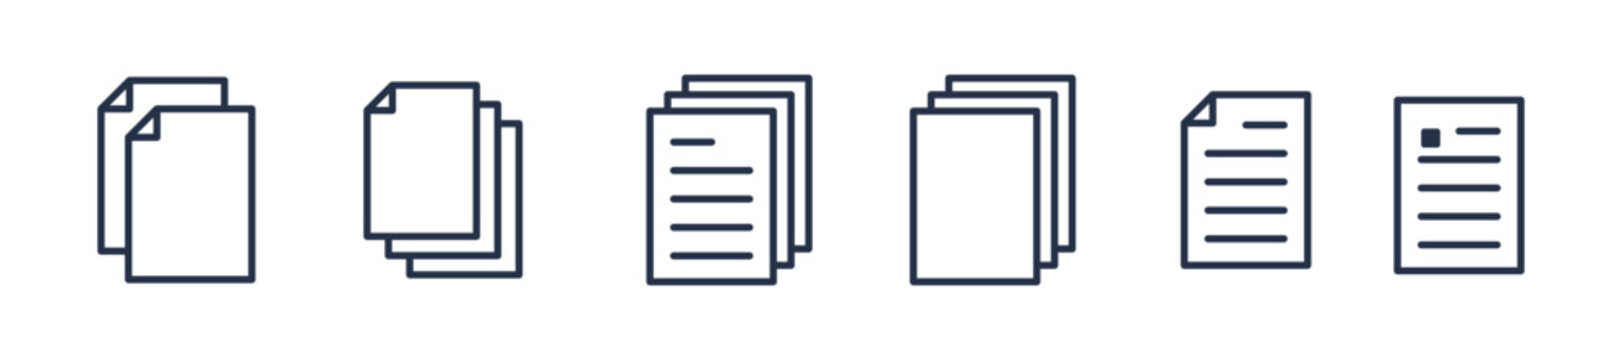 Paper documents icons. Lineicons set. Vector illustration